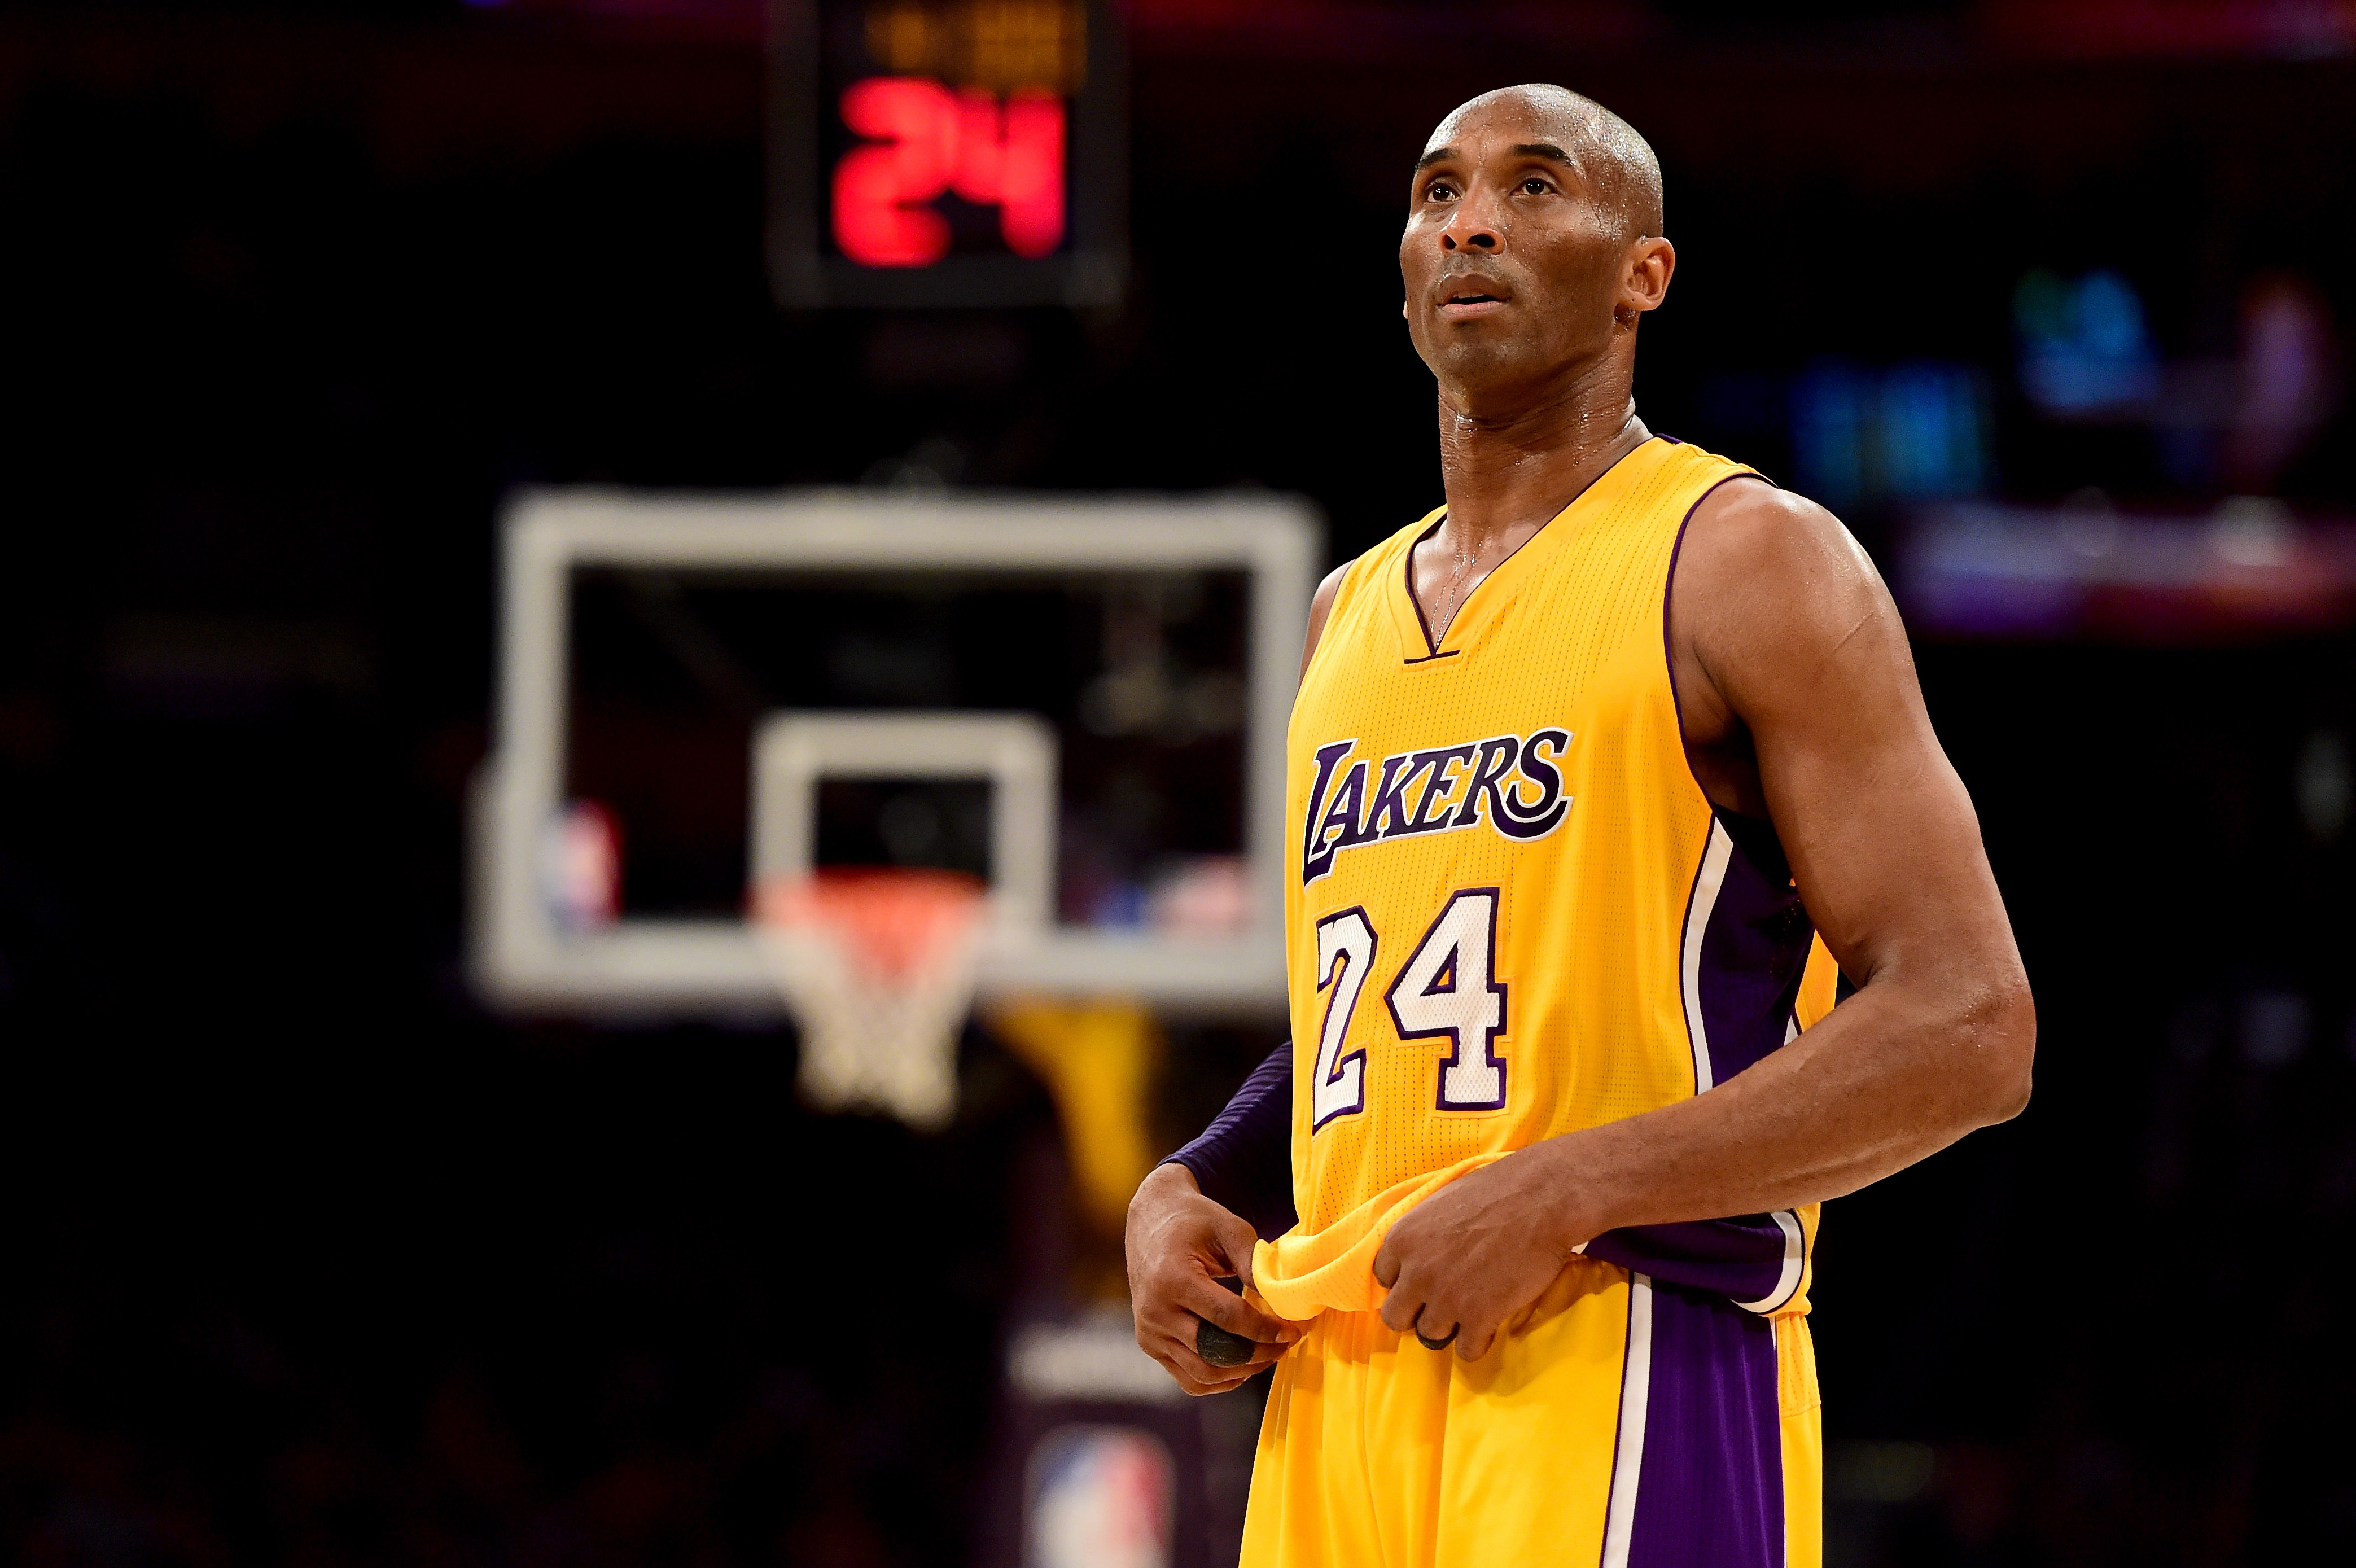 Karl Malone Willing to Fight Kobe Bryant to Settle Beef (VIDEO)